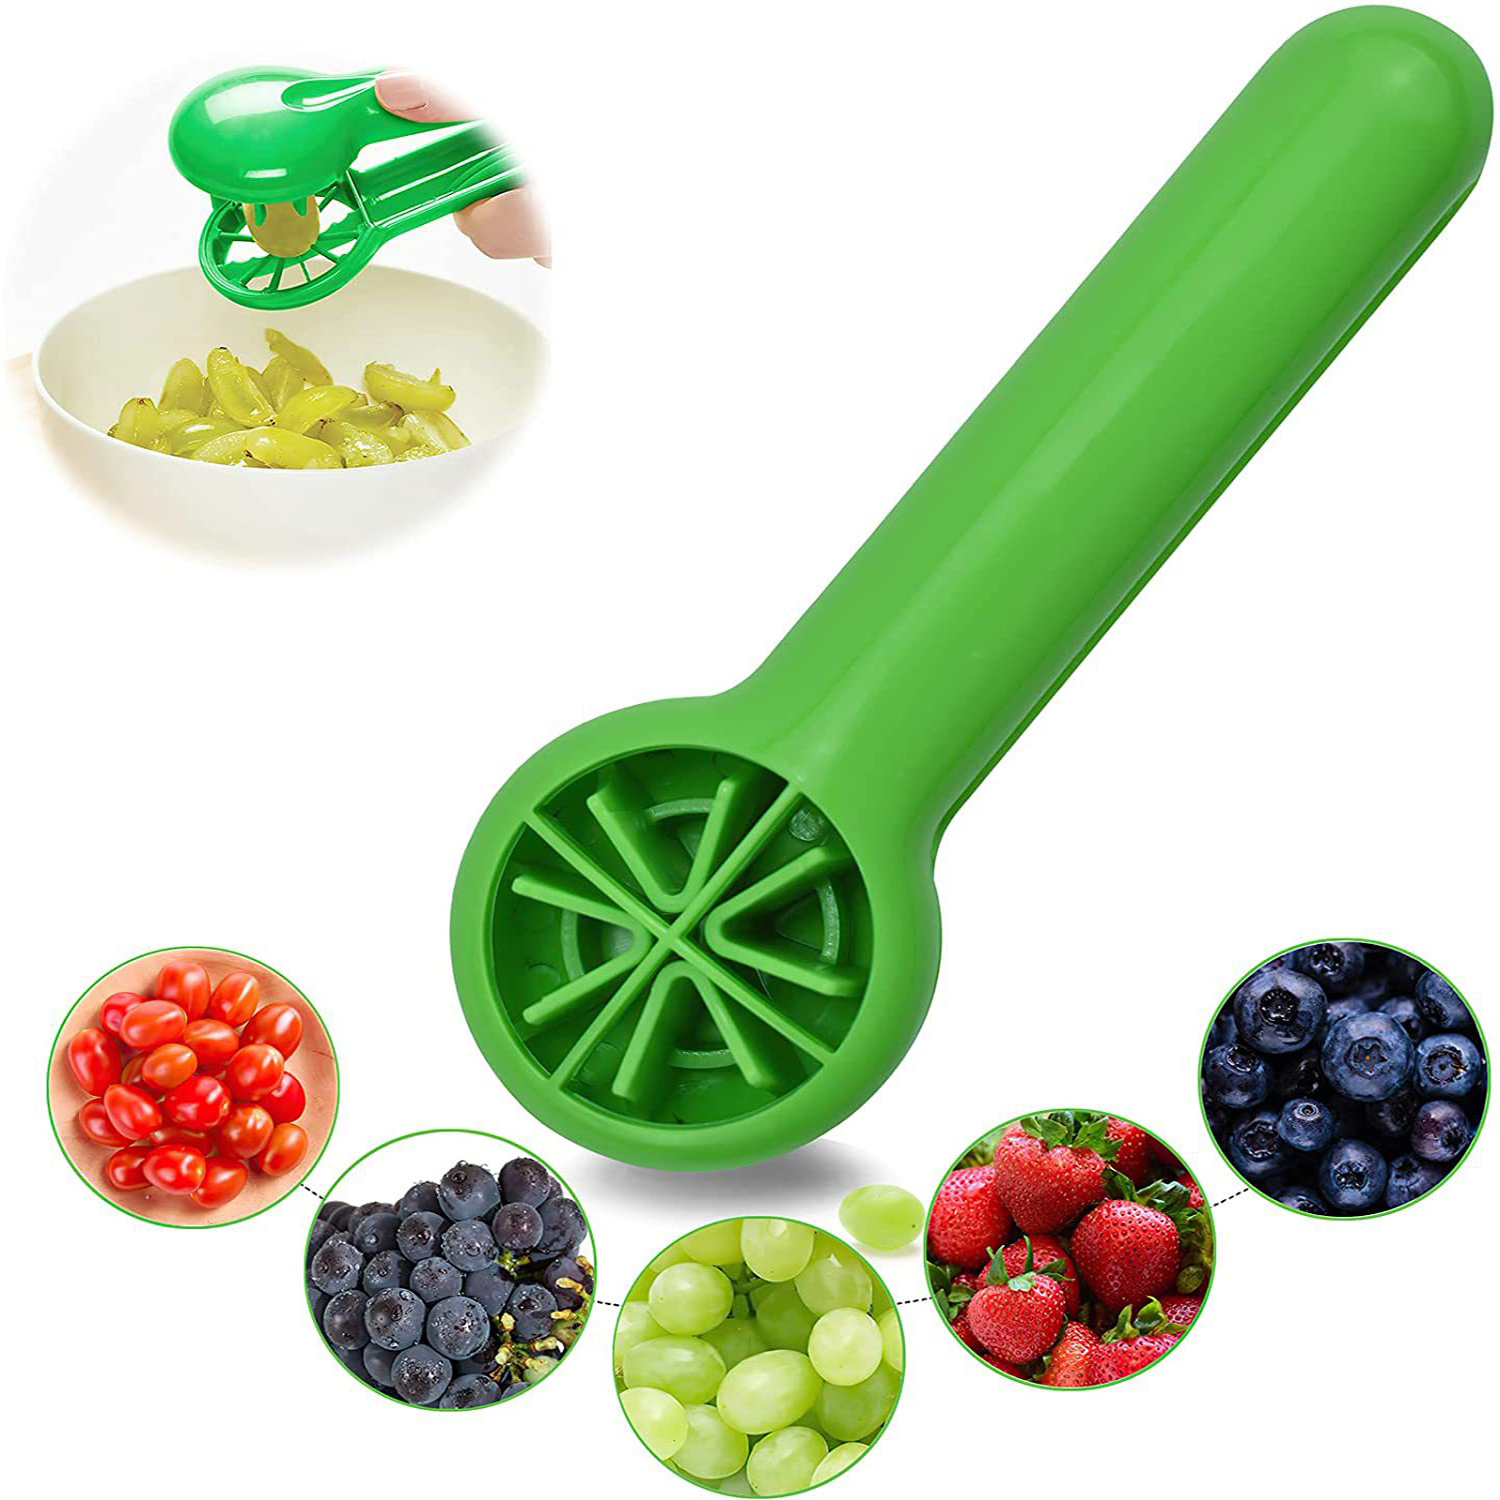 Multifunctional Cherry Tomato Chip Slicer Grape Cutter Vegetable Fruit Zip  Slicer Knife Chopper Kitchen Tools Cocina Accesories